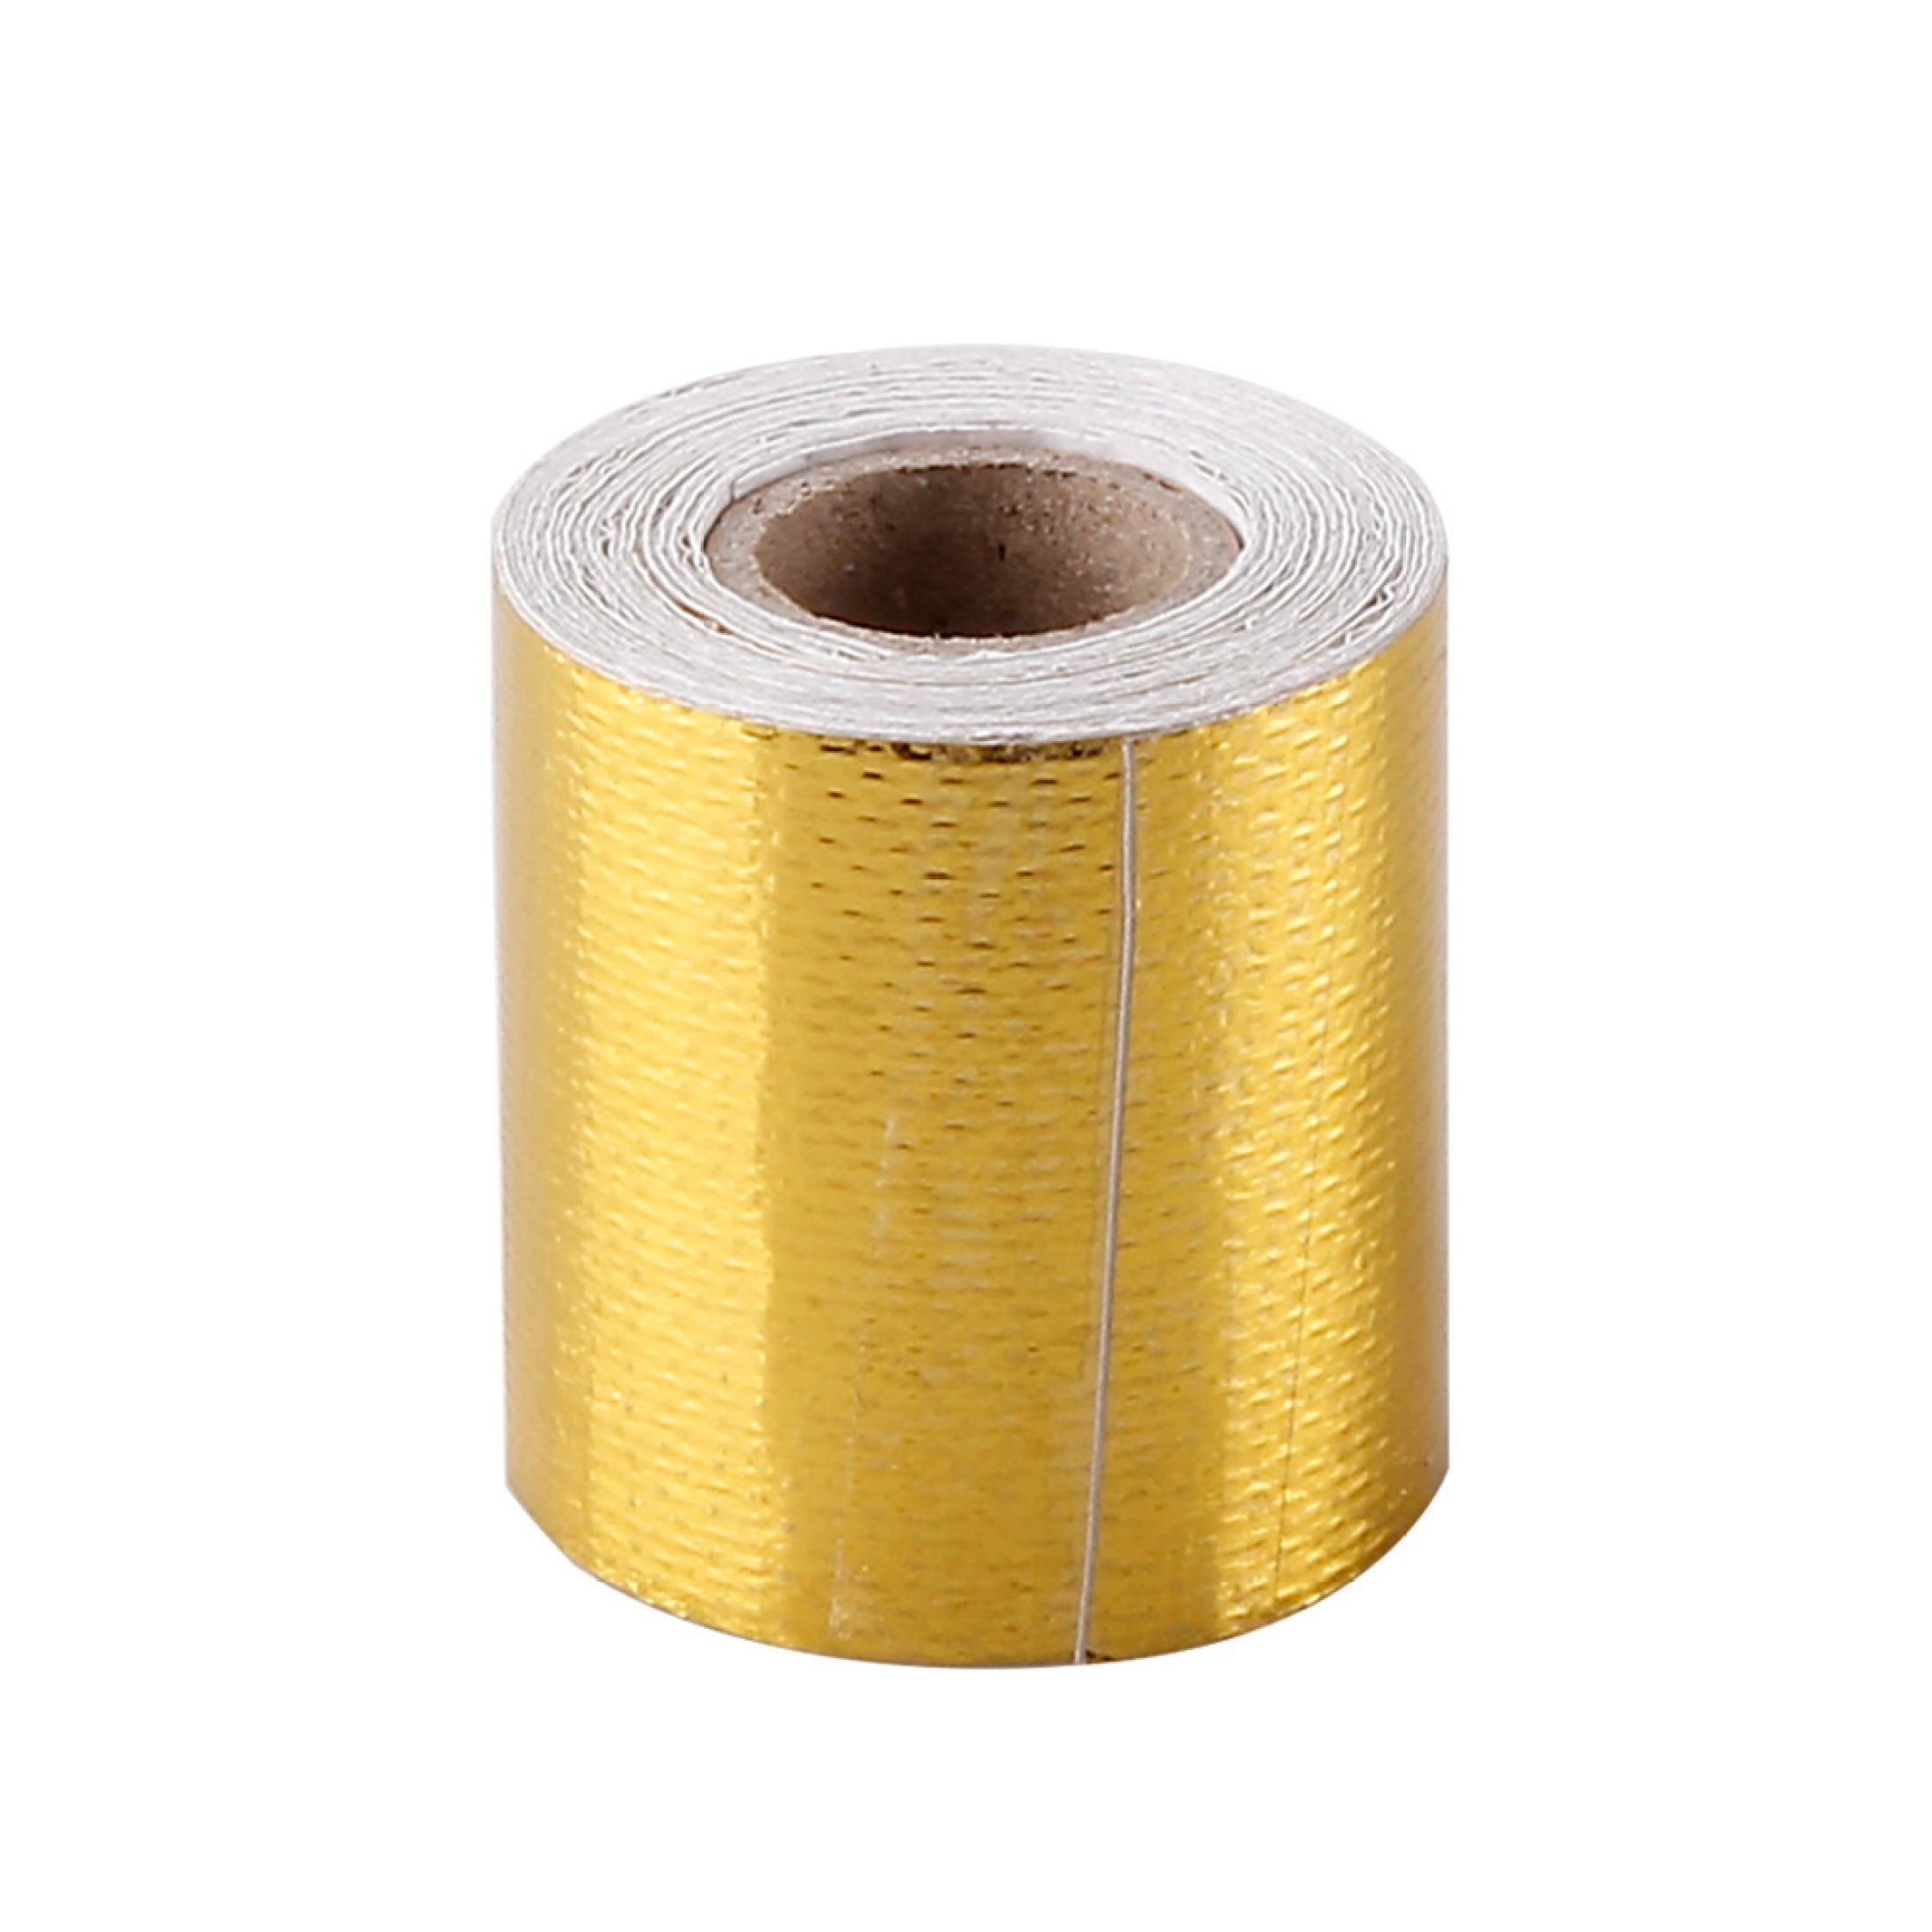 EUBUY Duct Tape Heavy Duty Waterproof No Residue Strong Adhesive for Home  Repair Use Carpet Binding Bundles Gold 